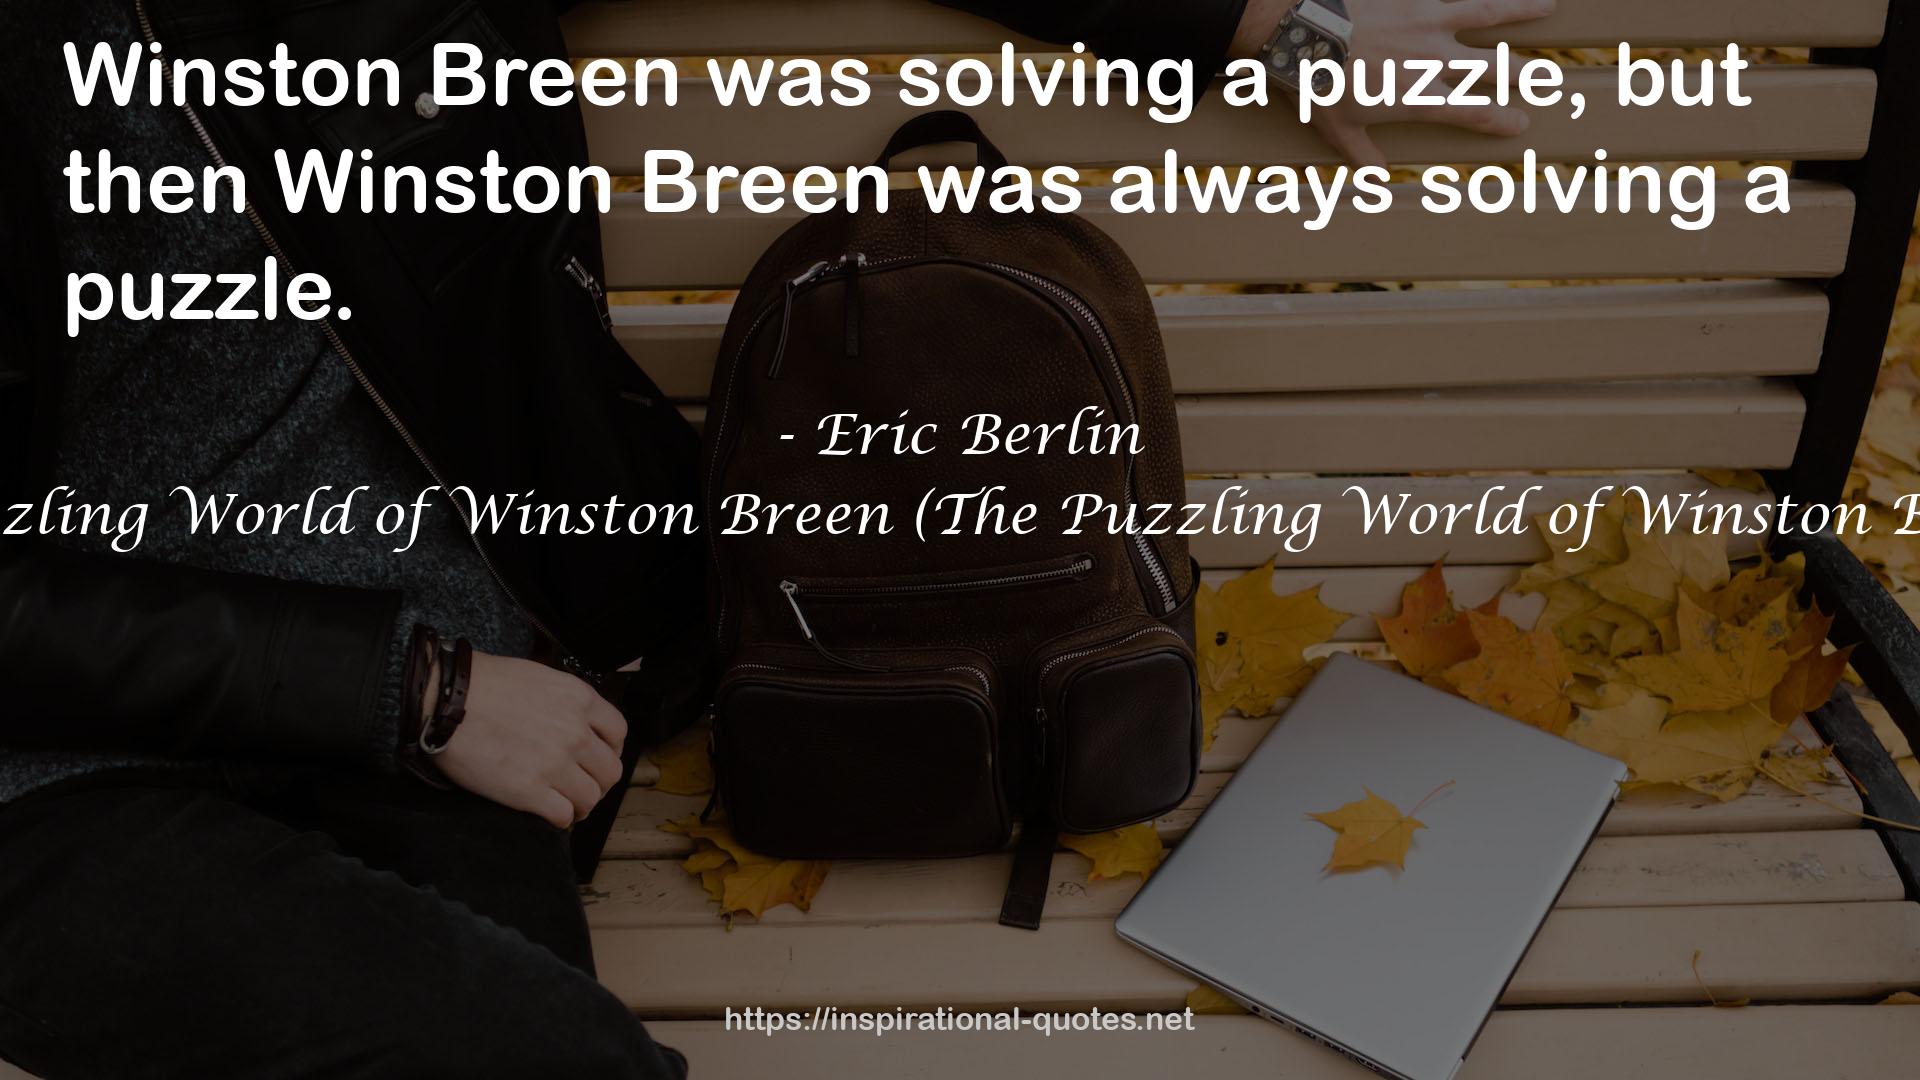 The Puzzling World of Winston Breen (The Puzzling World of Winston Breen #1) QUOTES